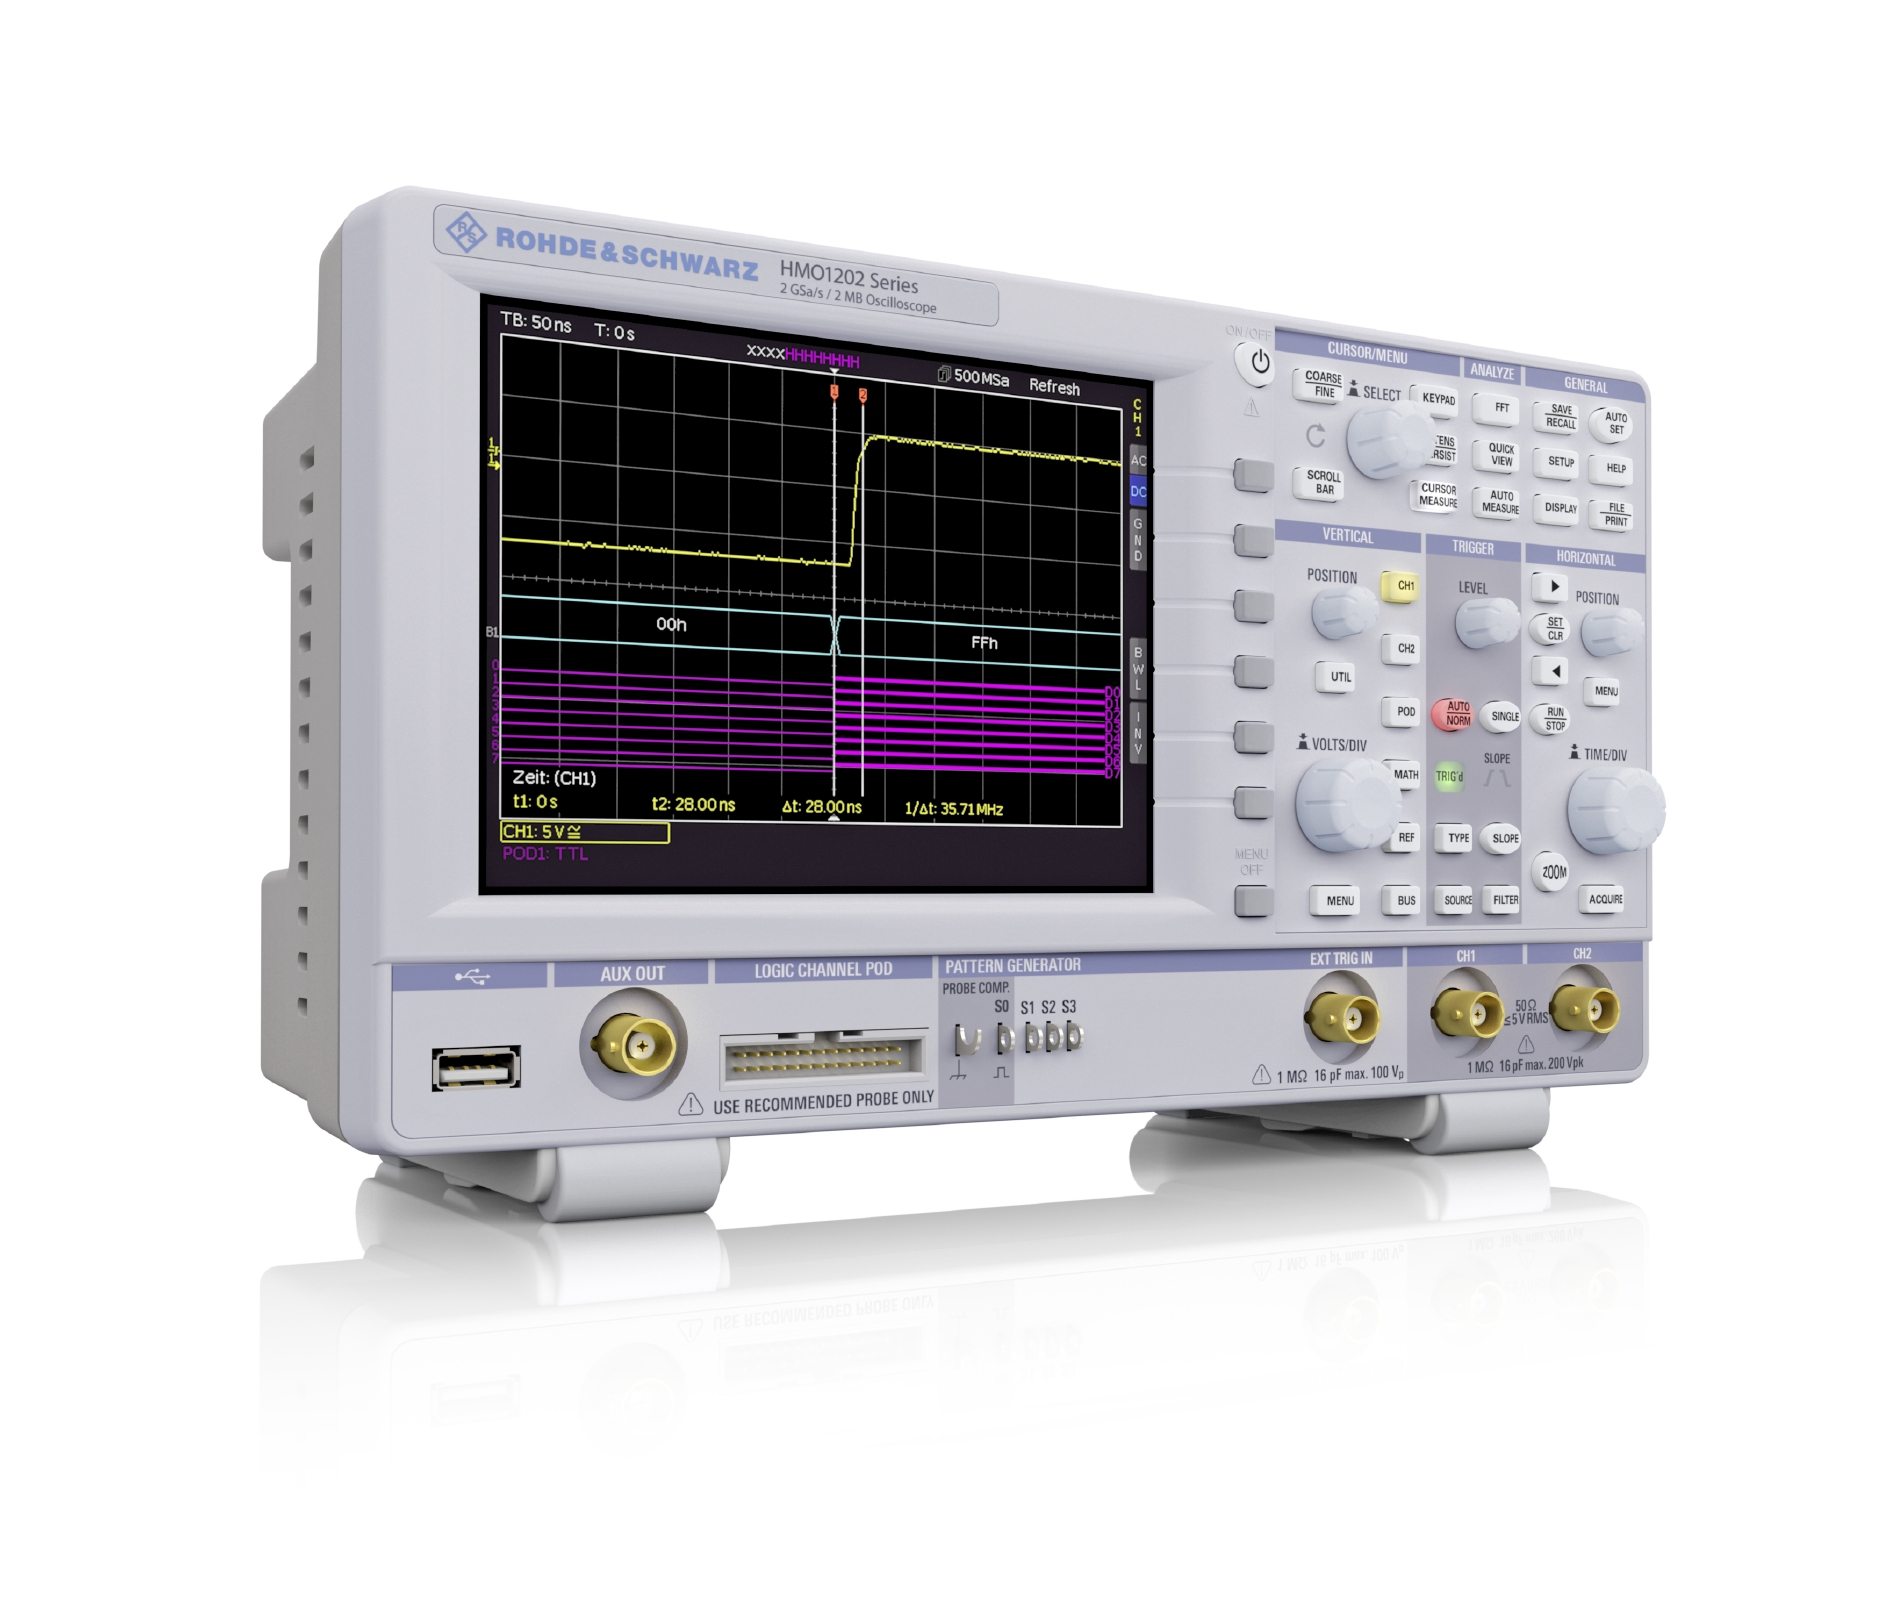 Low cost scopes get fast Fourier transform analysis